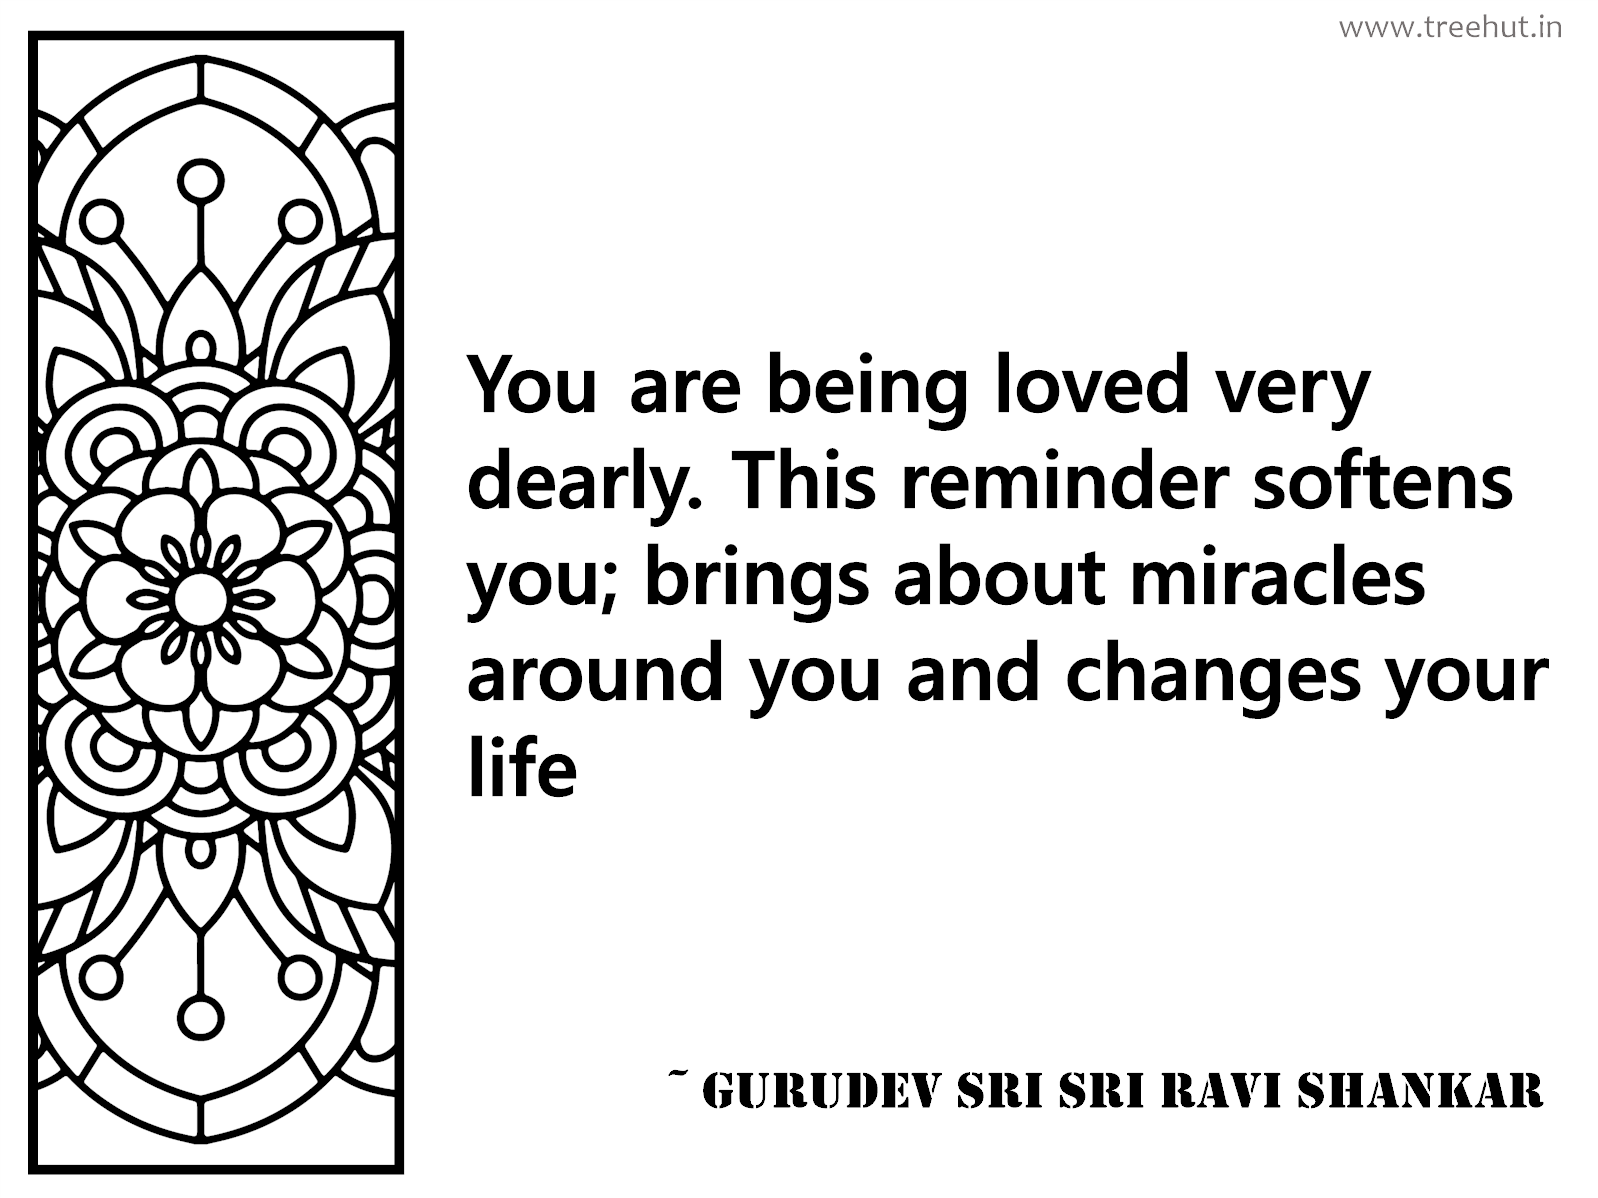 You are being loved very dearly. This reminder softens you; brings about miracles around you and changes your life Inspirational Quote by Gurudev Sri Sri Ravi Shankar, coloring pages